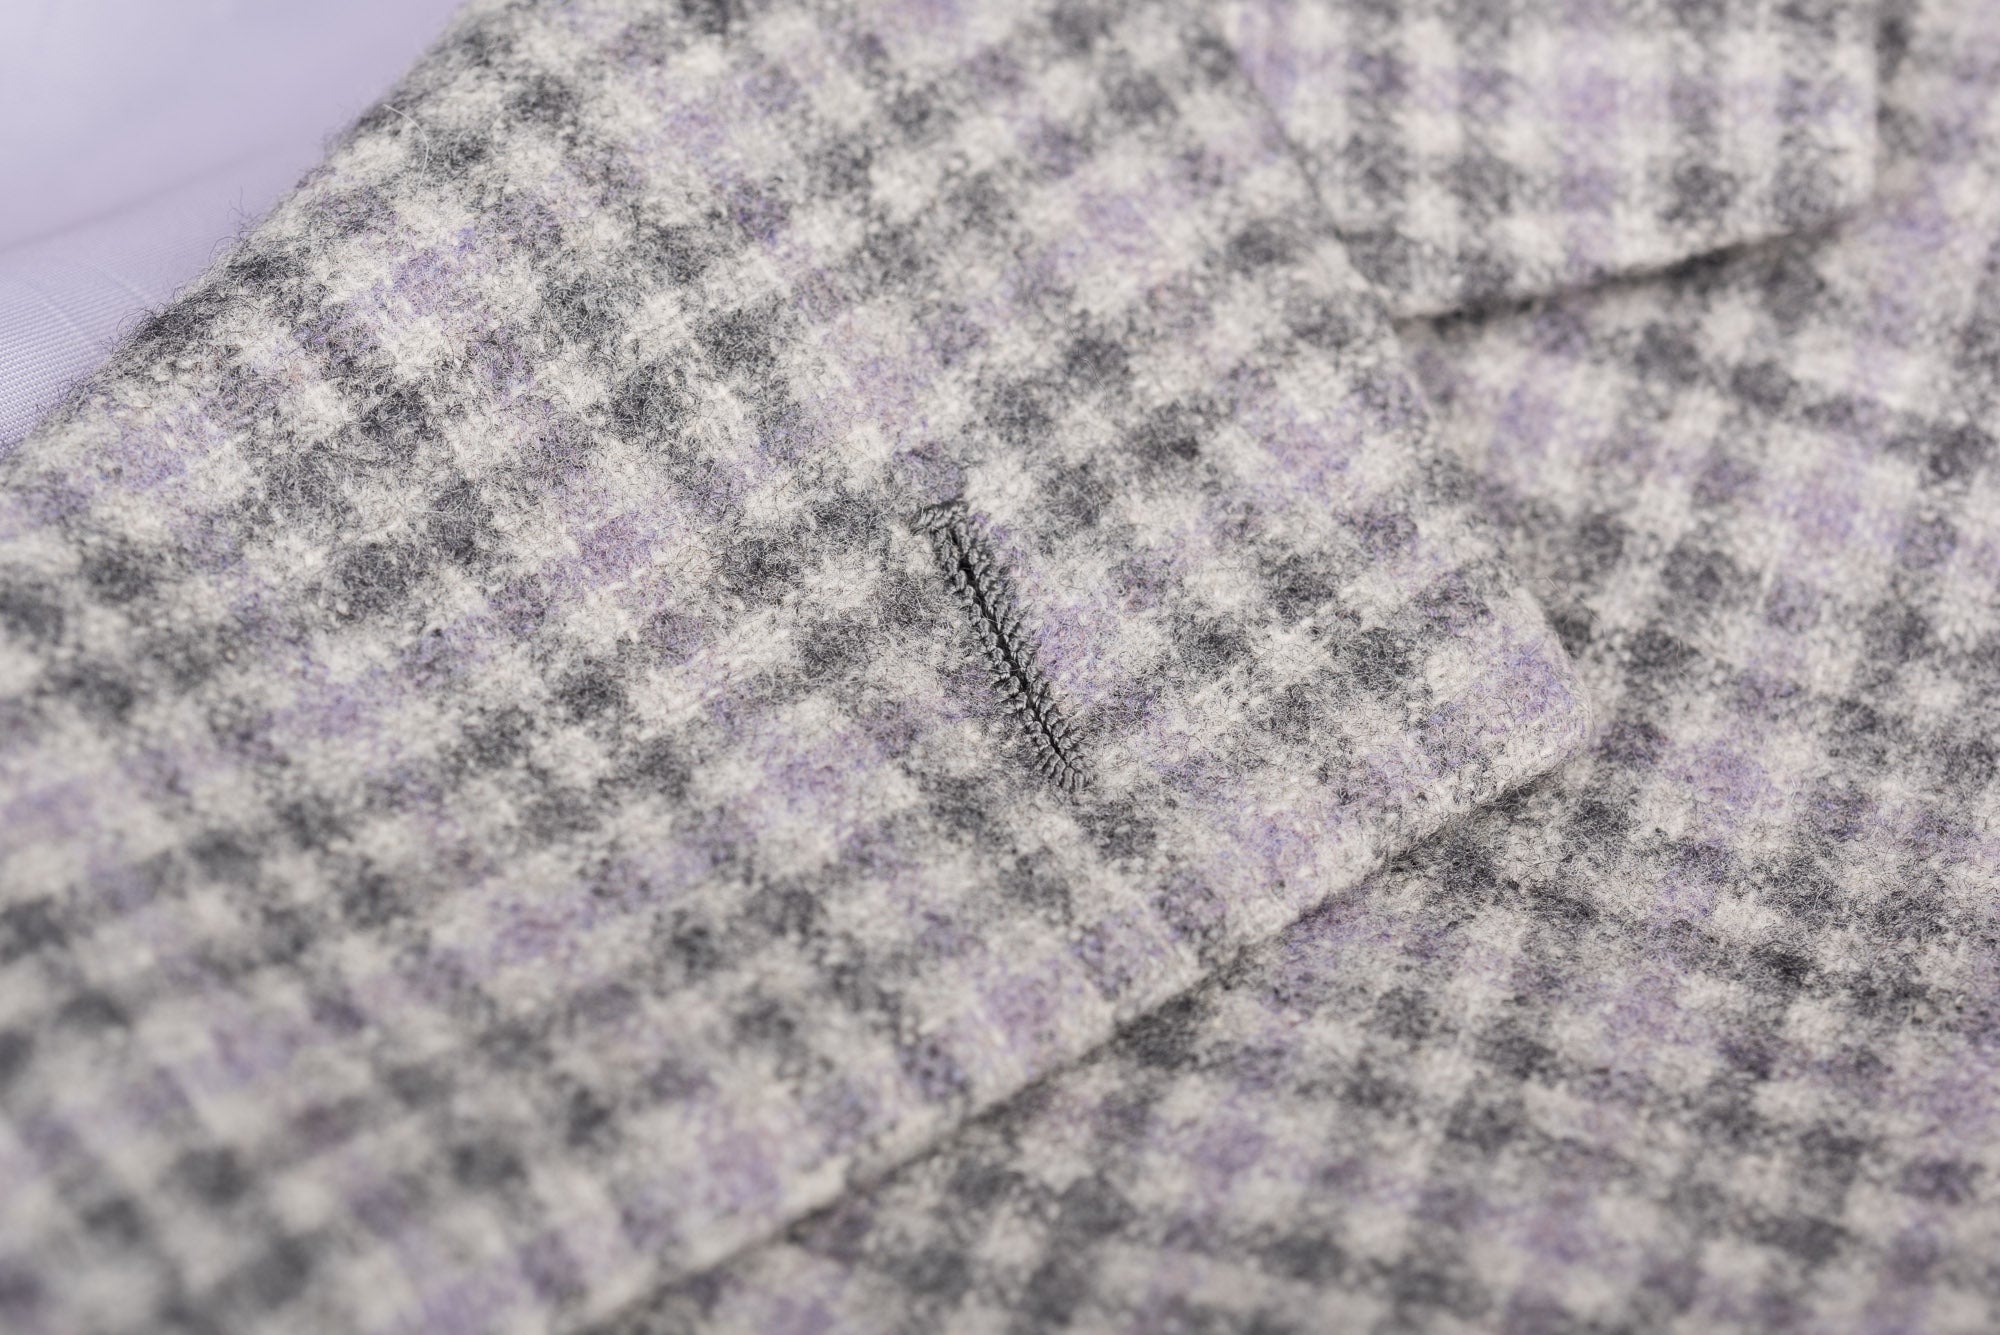 D'AVENZA Roma Handmade Gray Plaid Wool-Cashmere Flannel Jacket 50 NEW US 40 D'AVENZA